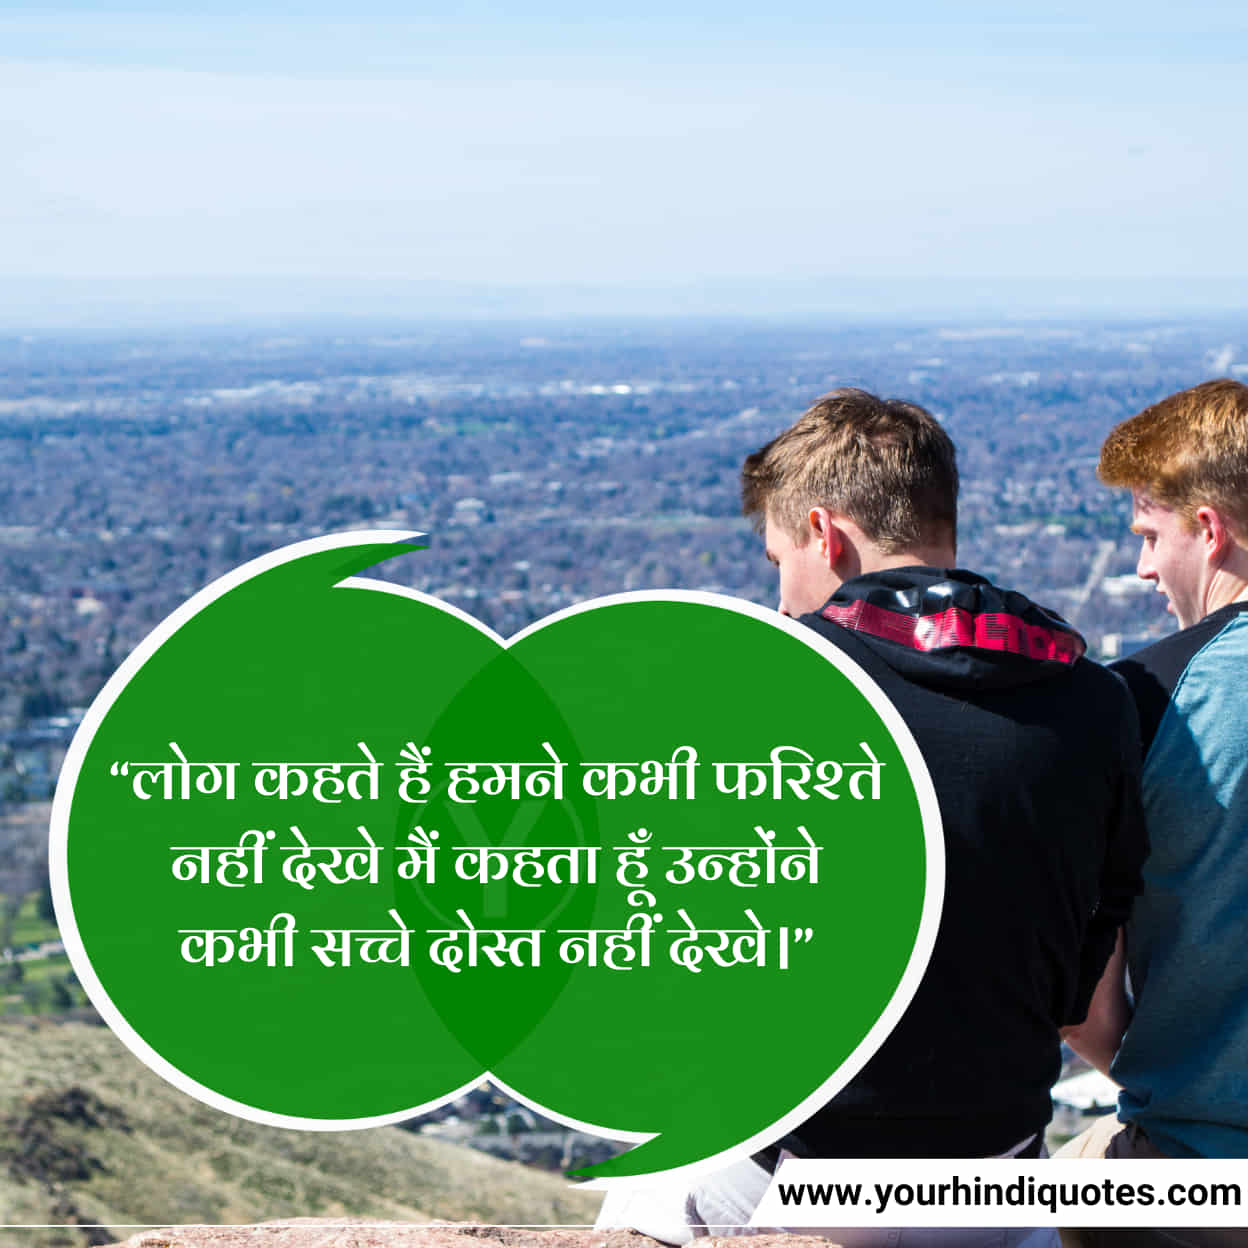 Happy Friendship Day Quotes In Hindi